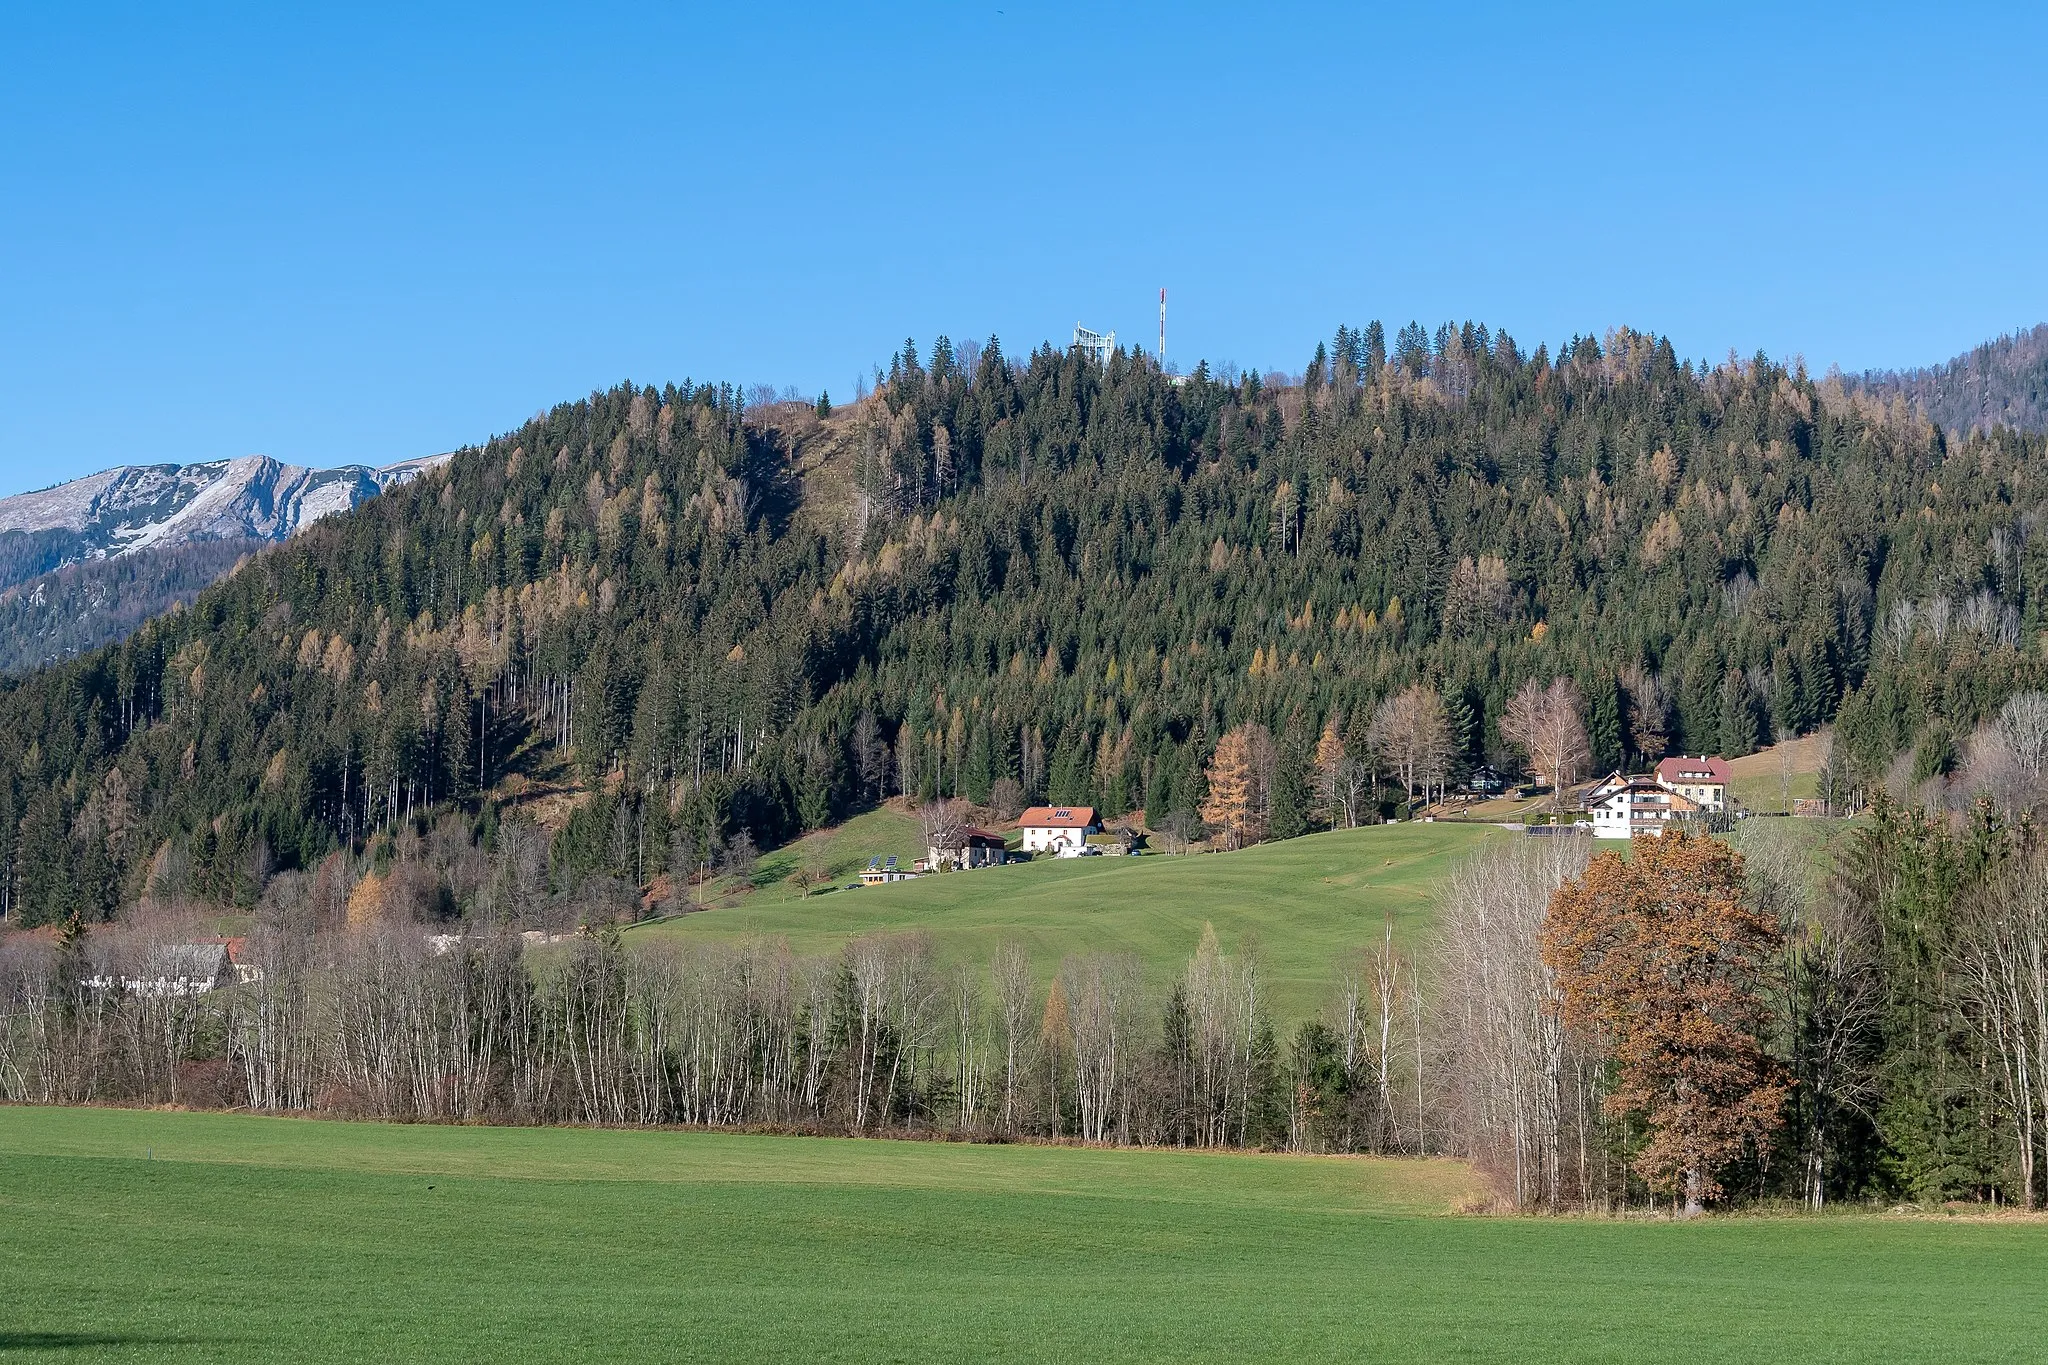 Photo showing: Wurbauerkogel, a small mountain in Windischgarsten, Upper Austria with an observation tower on the top